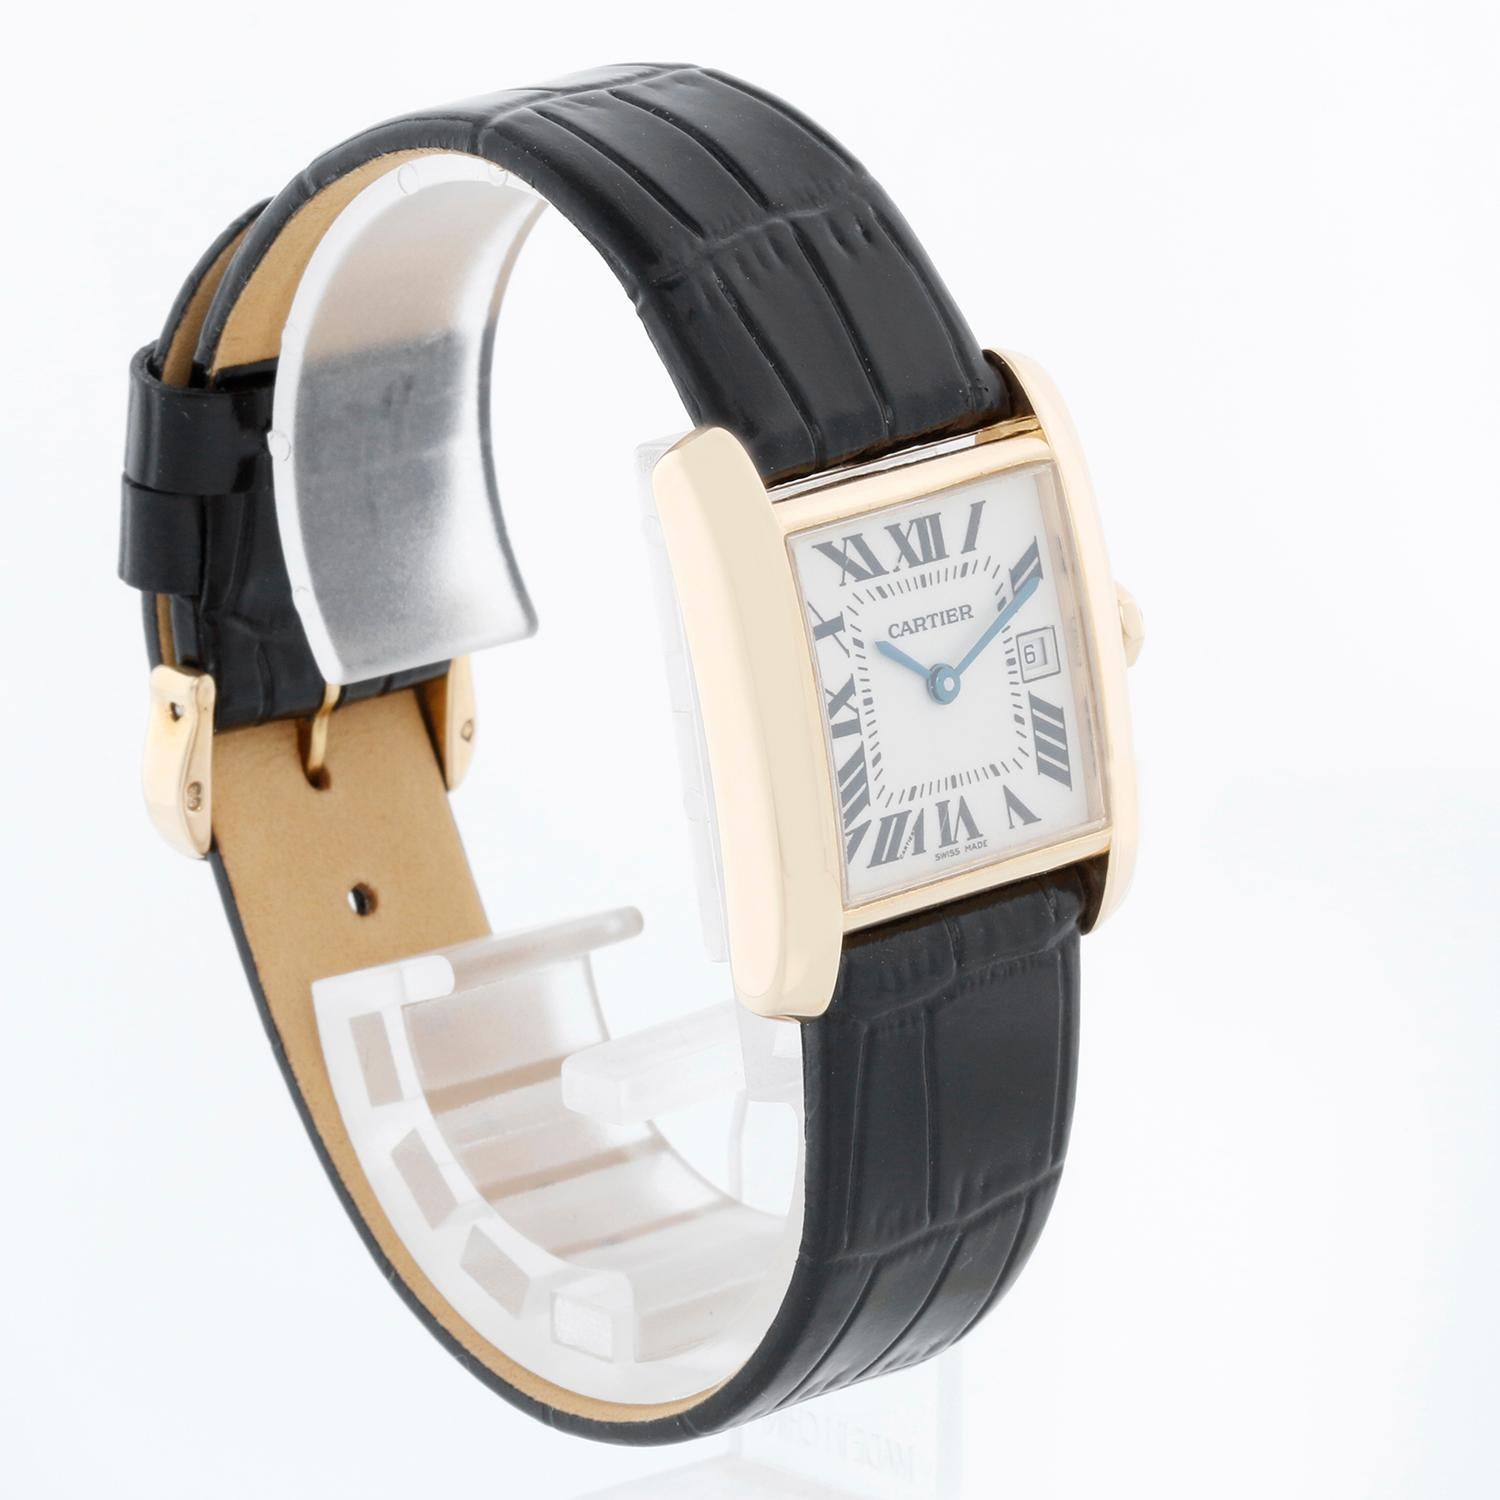 Cartier Tank Francaise Midsize 18k Yellow Gold Men's/Ladies Watch W50014N2 In Excellent Condition For Sale In Dallas, TX